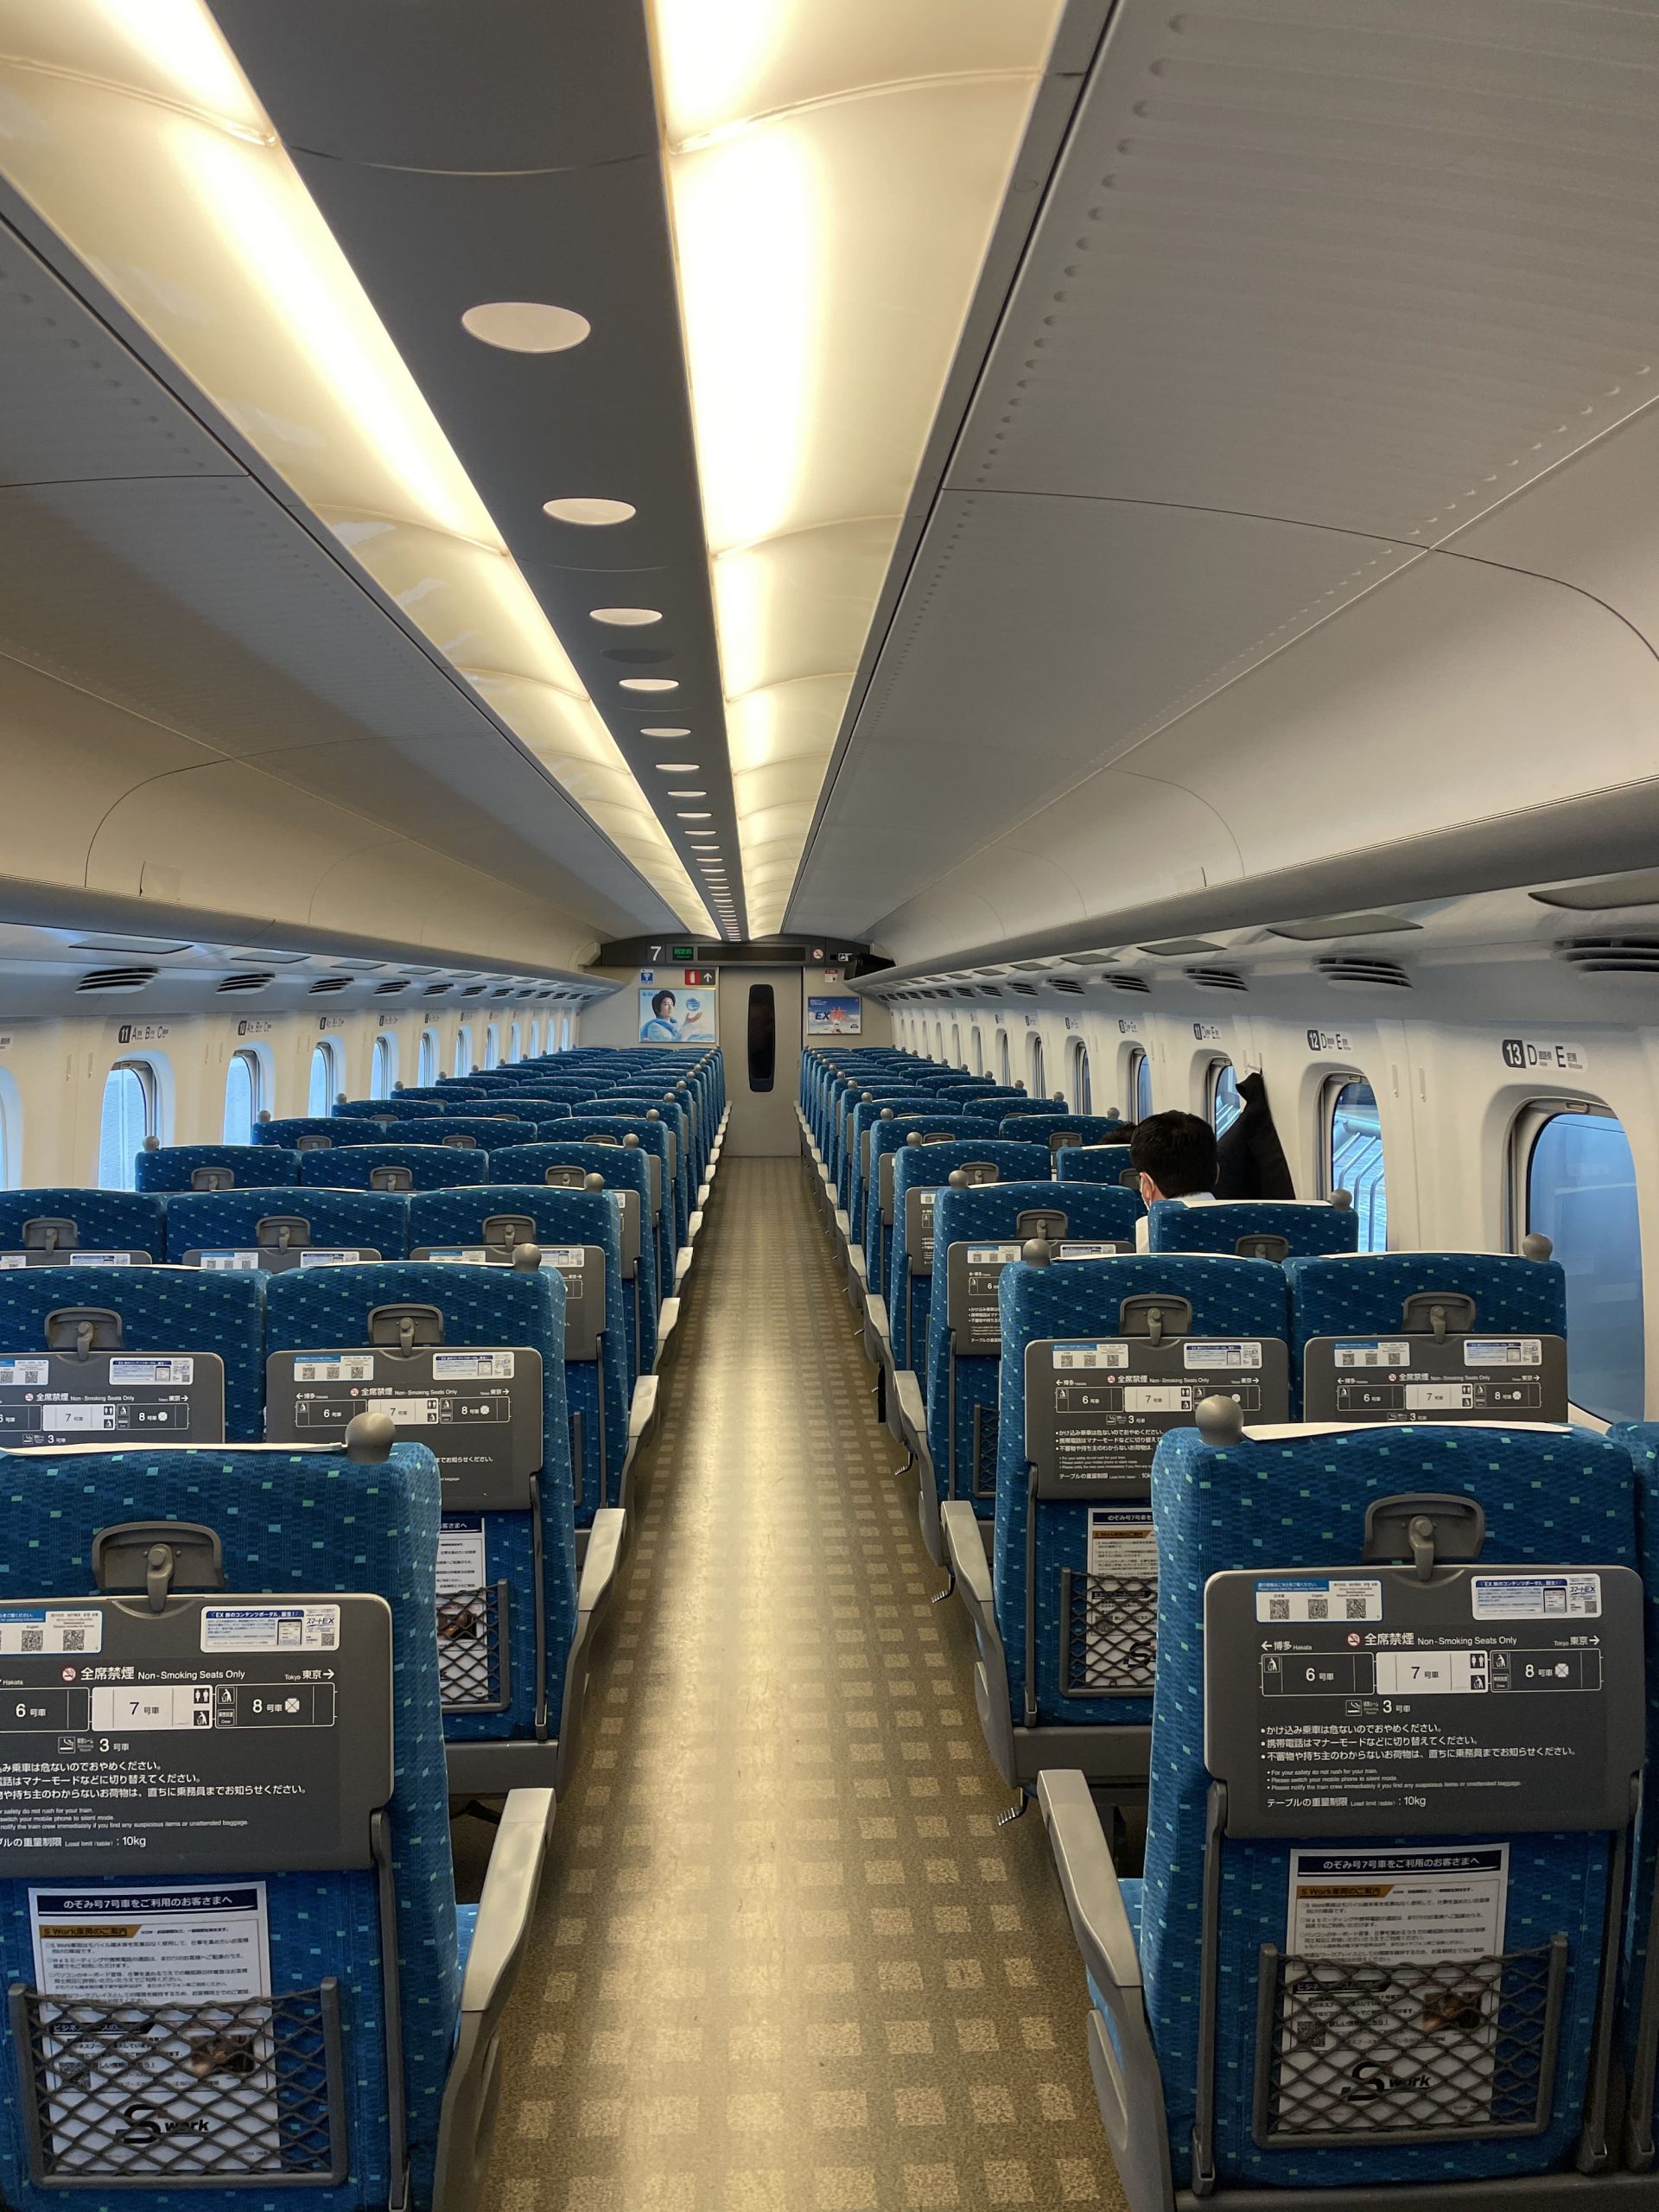 shinkansen bullet train tokyo kyoto economy class is it worth upgrading to green first class what to do if have oversized luggage how to take the bullet train tutorial